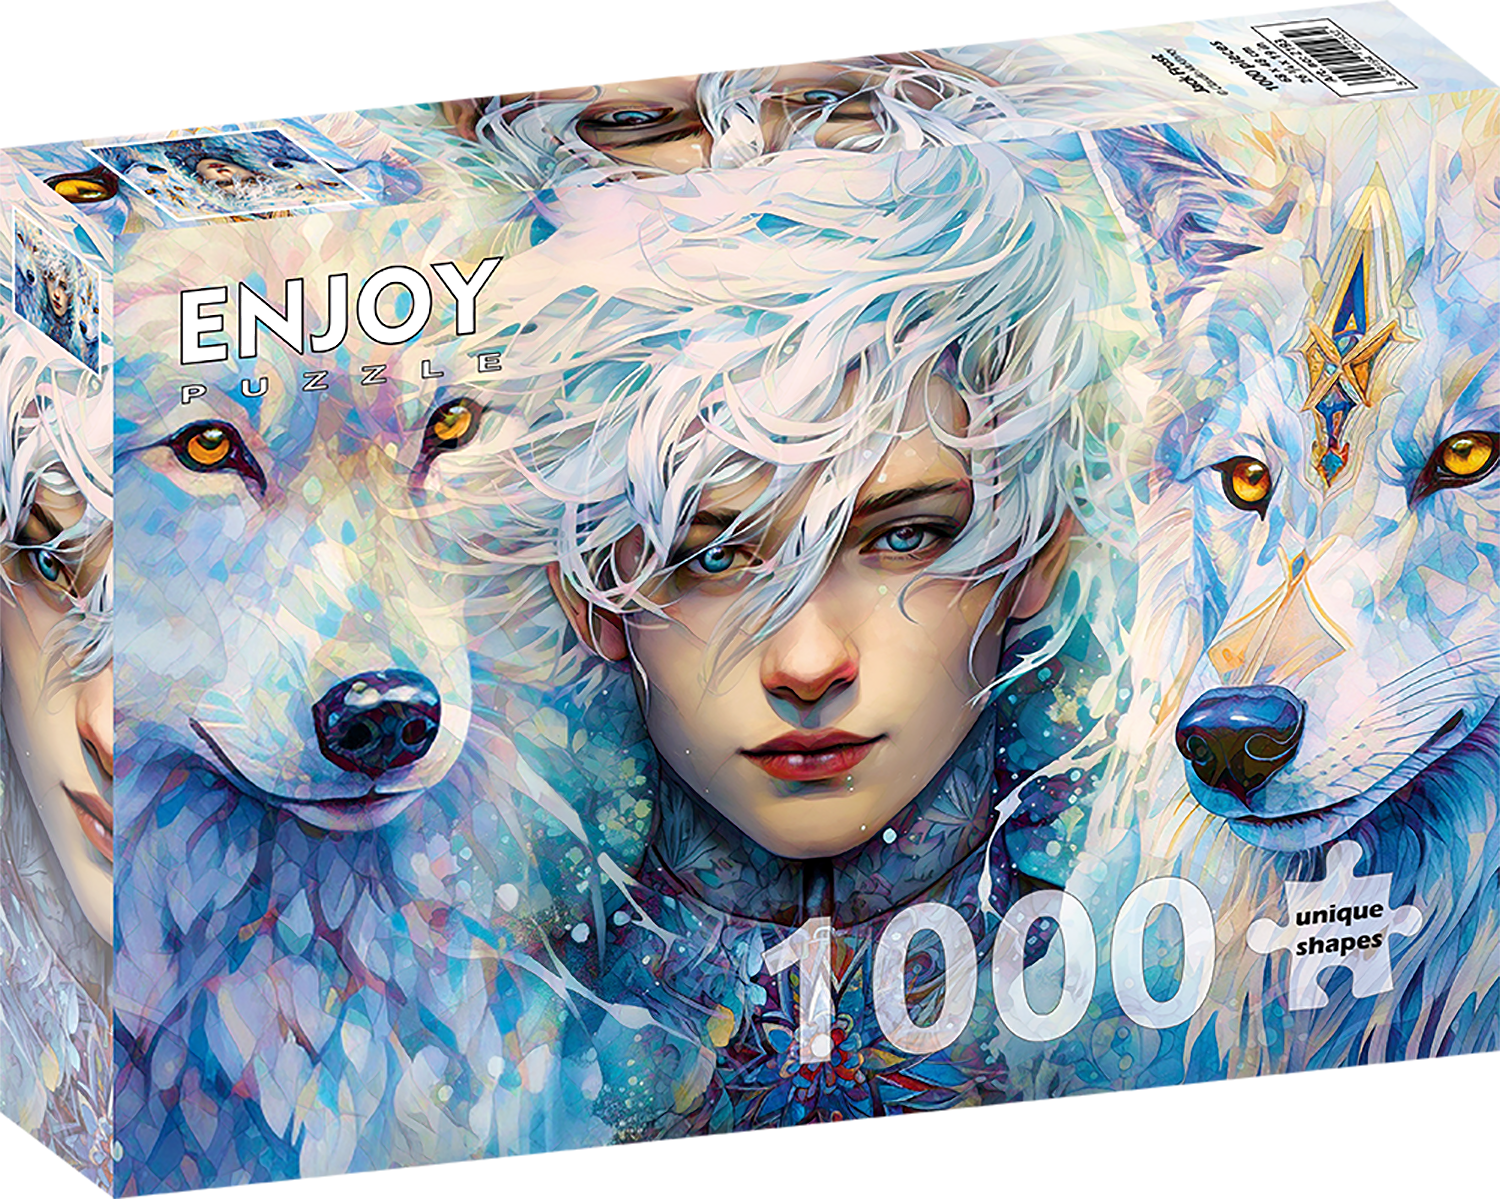 1000 Pieces Jigsaw Puzzle - Jack Frost (2193)